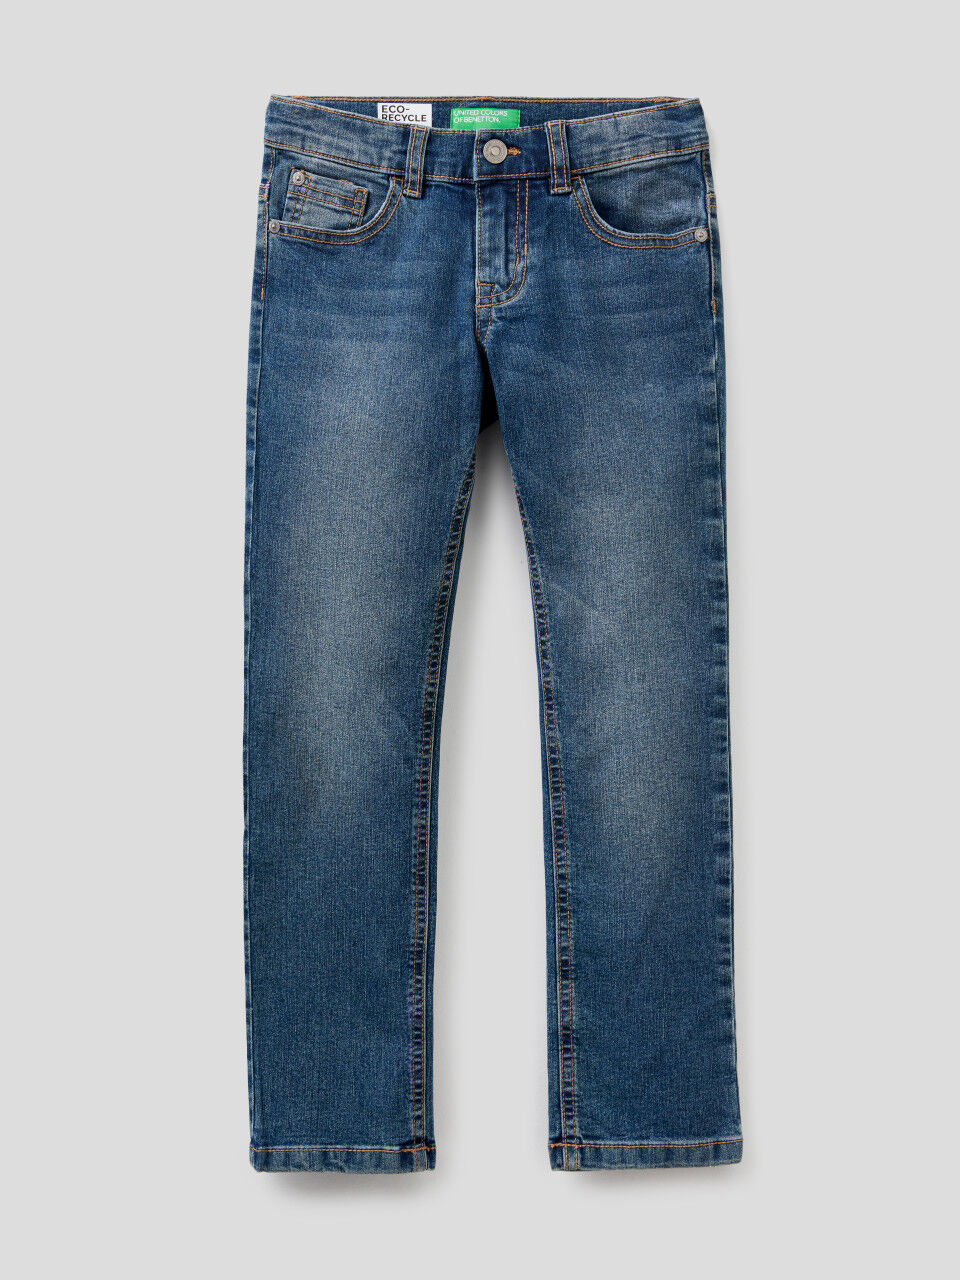 United Colors of Benetton Jeans Bambino